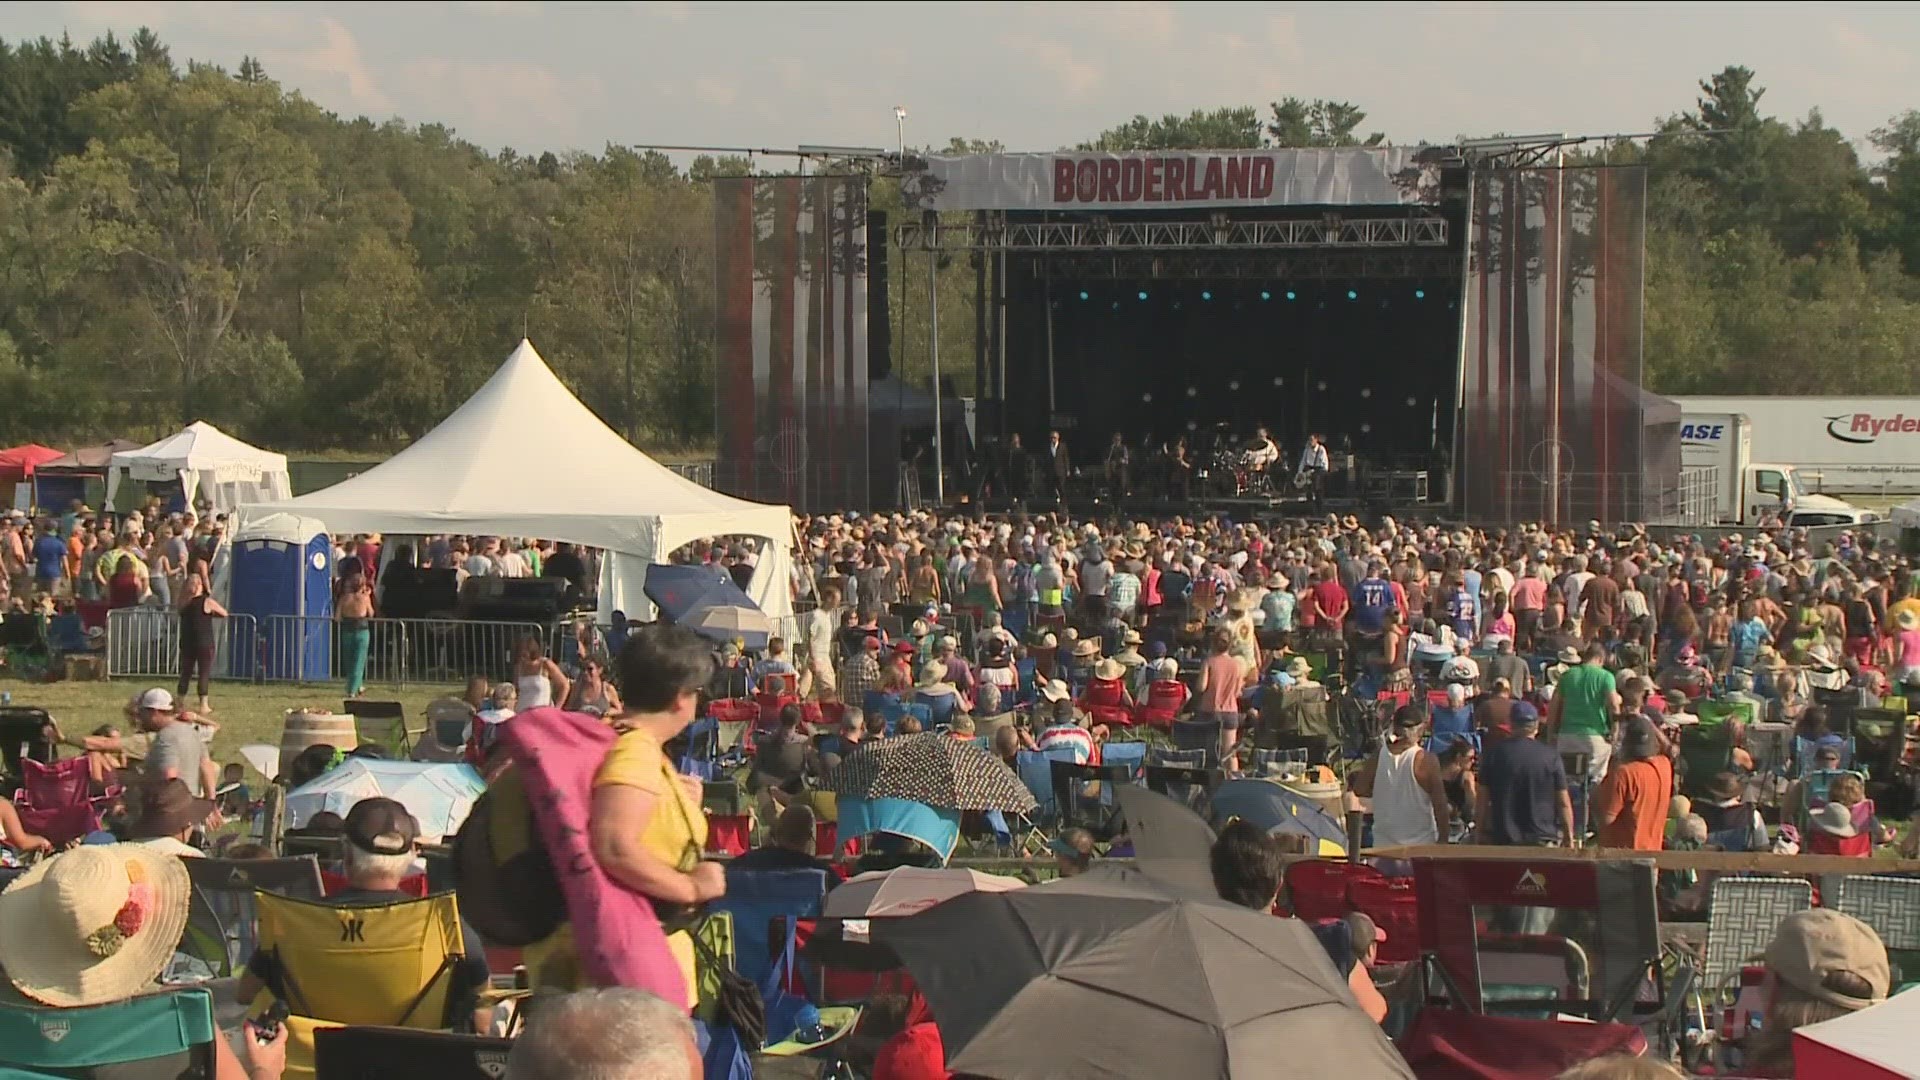 Daybreak's Lauren Hall previews several music events happening in WNY this weekend, including Borderland Festival at Knox Farm State Park.